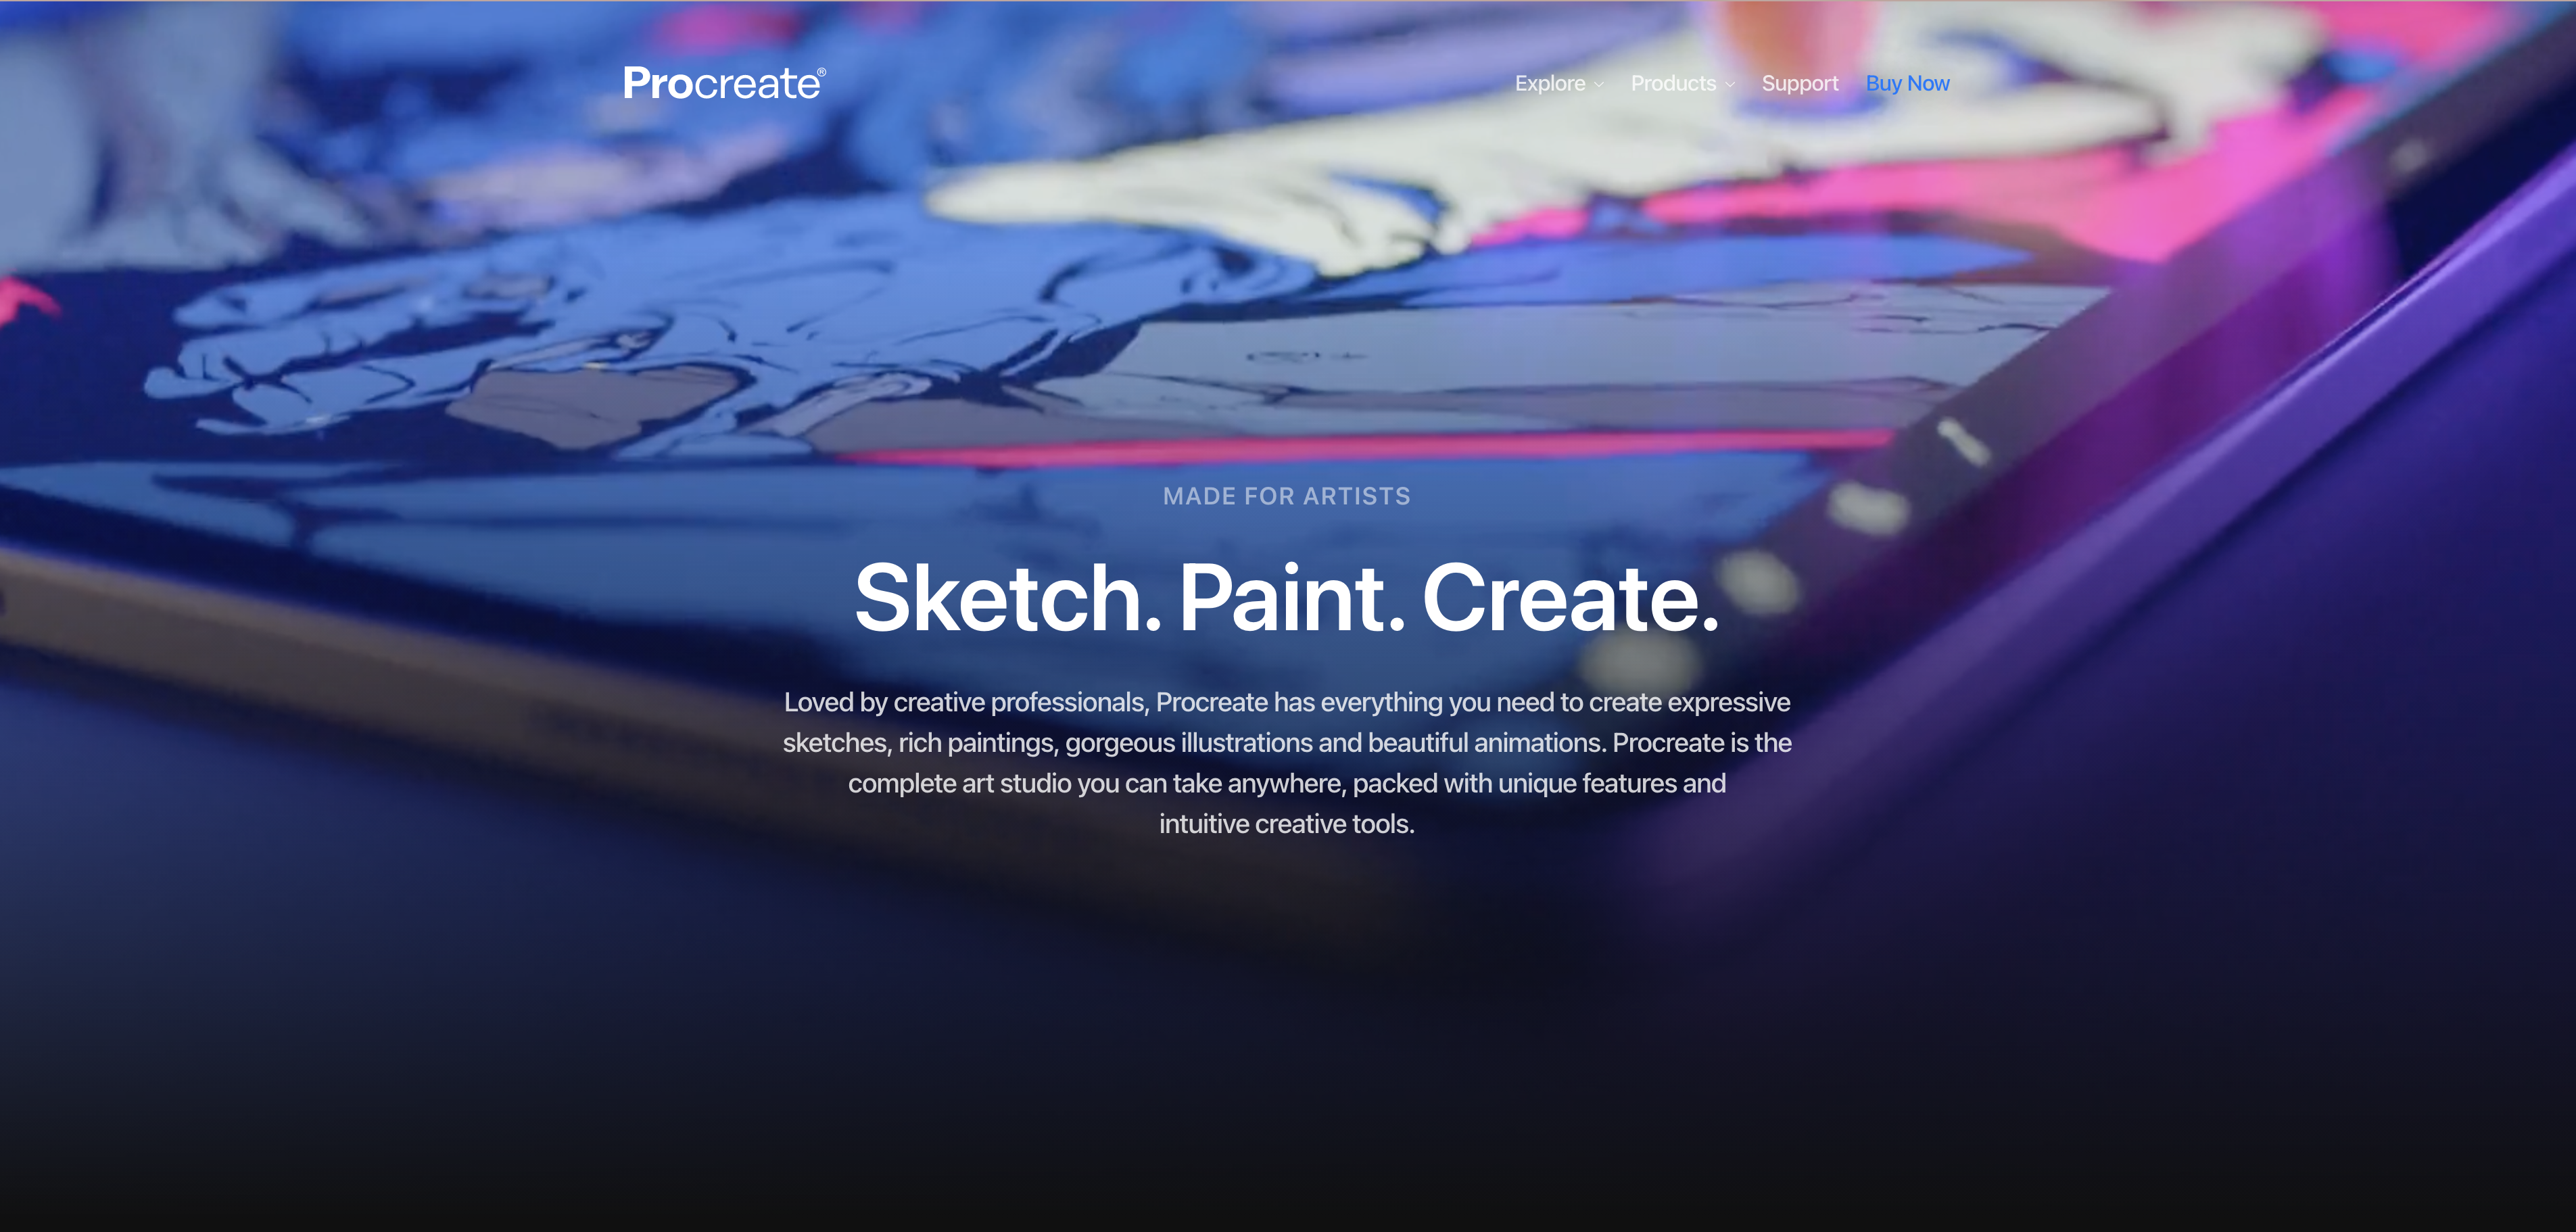 Use Procreate to create illustrations, texted backgrounds for your graphics, you can add doodles to your photos or create GIFs and animations for your videos.